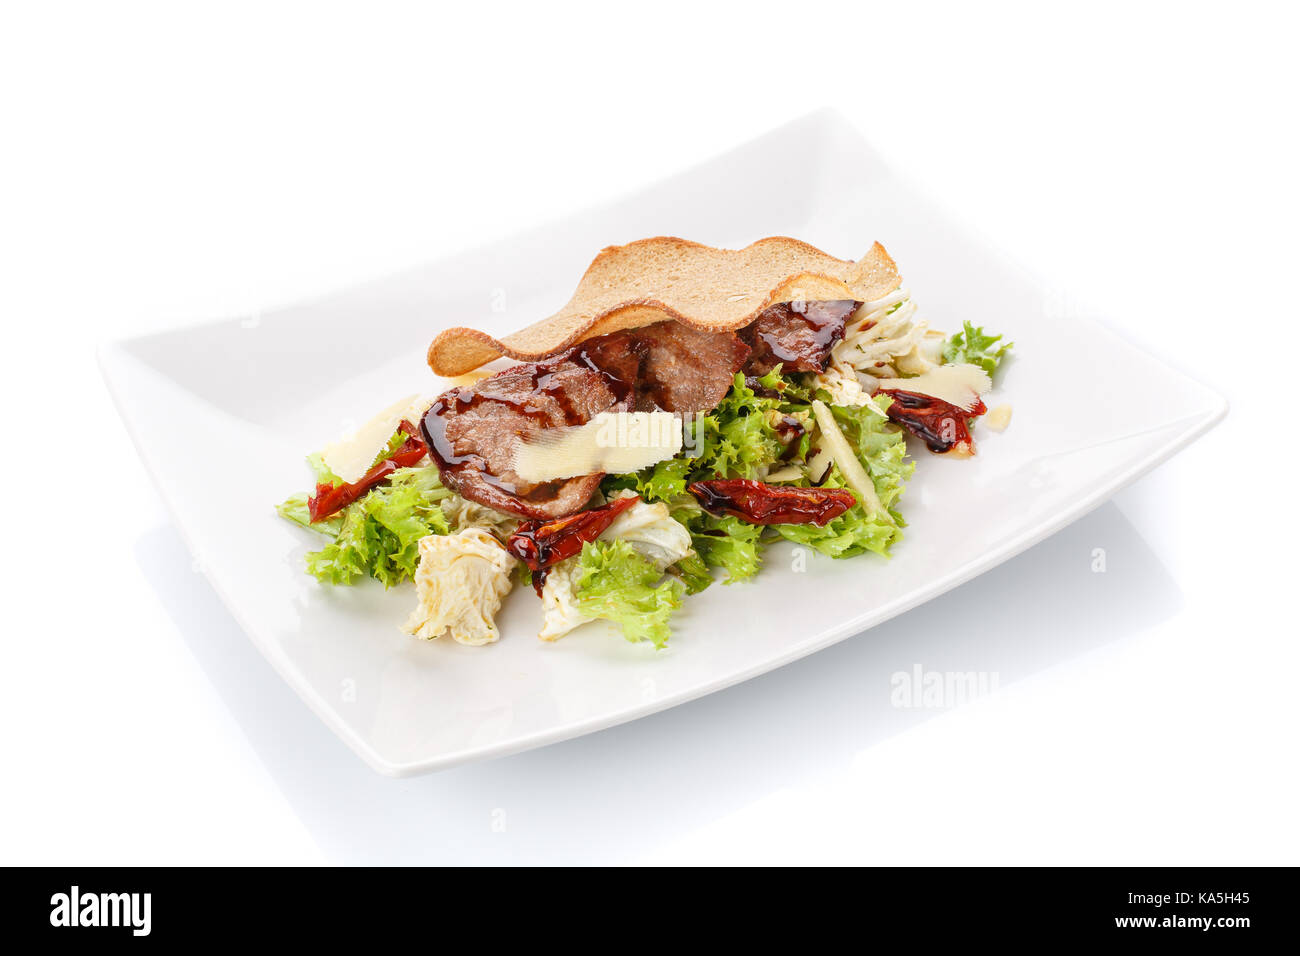 Restaurant food. Salad with bread in a plate. Delicious food. Stock Photo